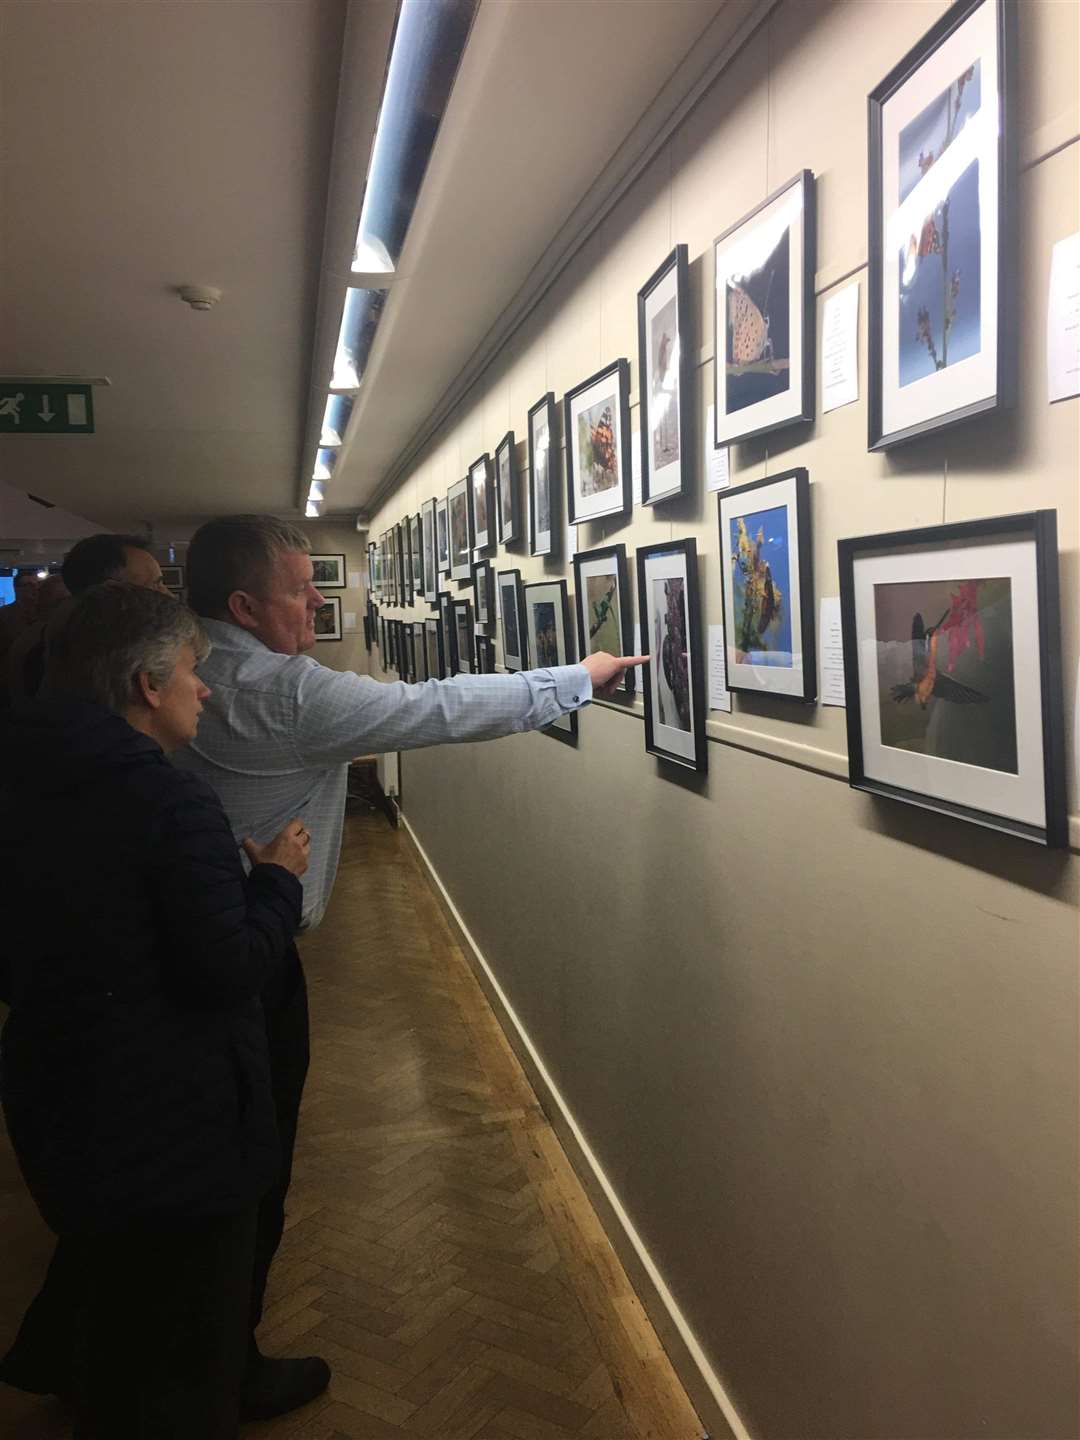 Richard's exhibition is being held at the Mick Jagger Centre, in Dartford, throughout April (8749386)